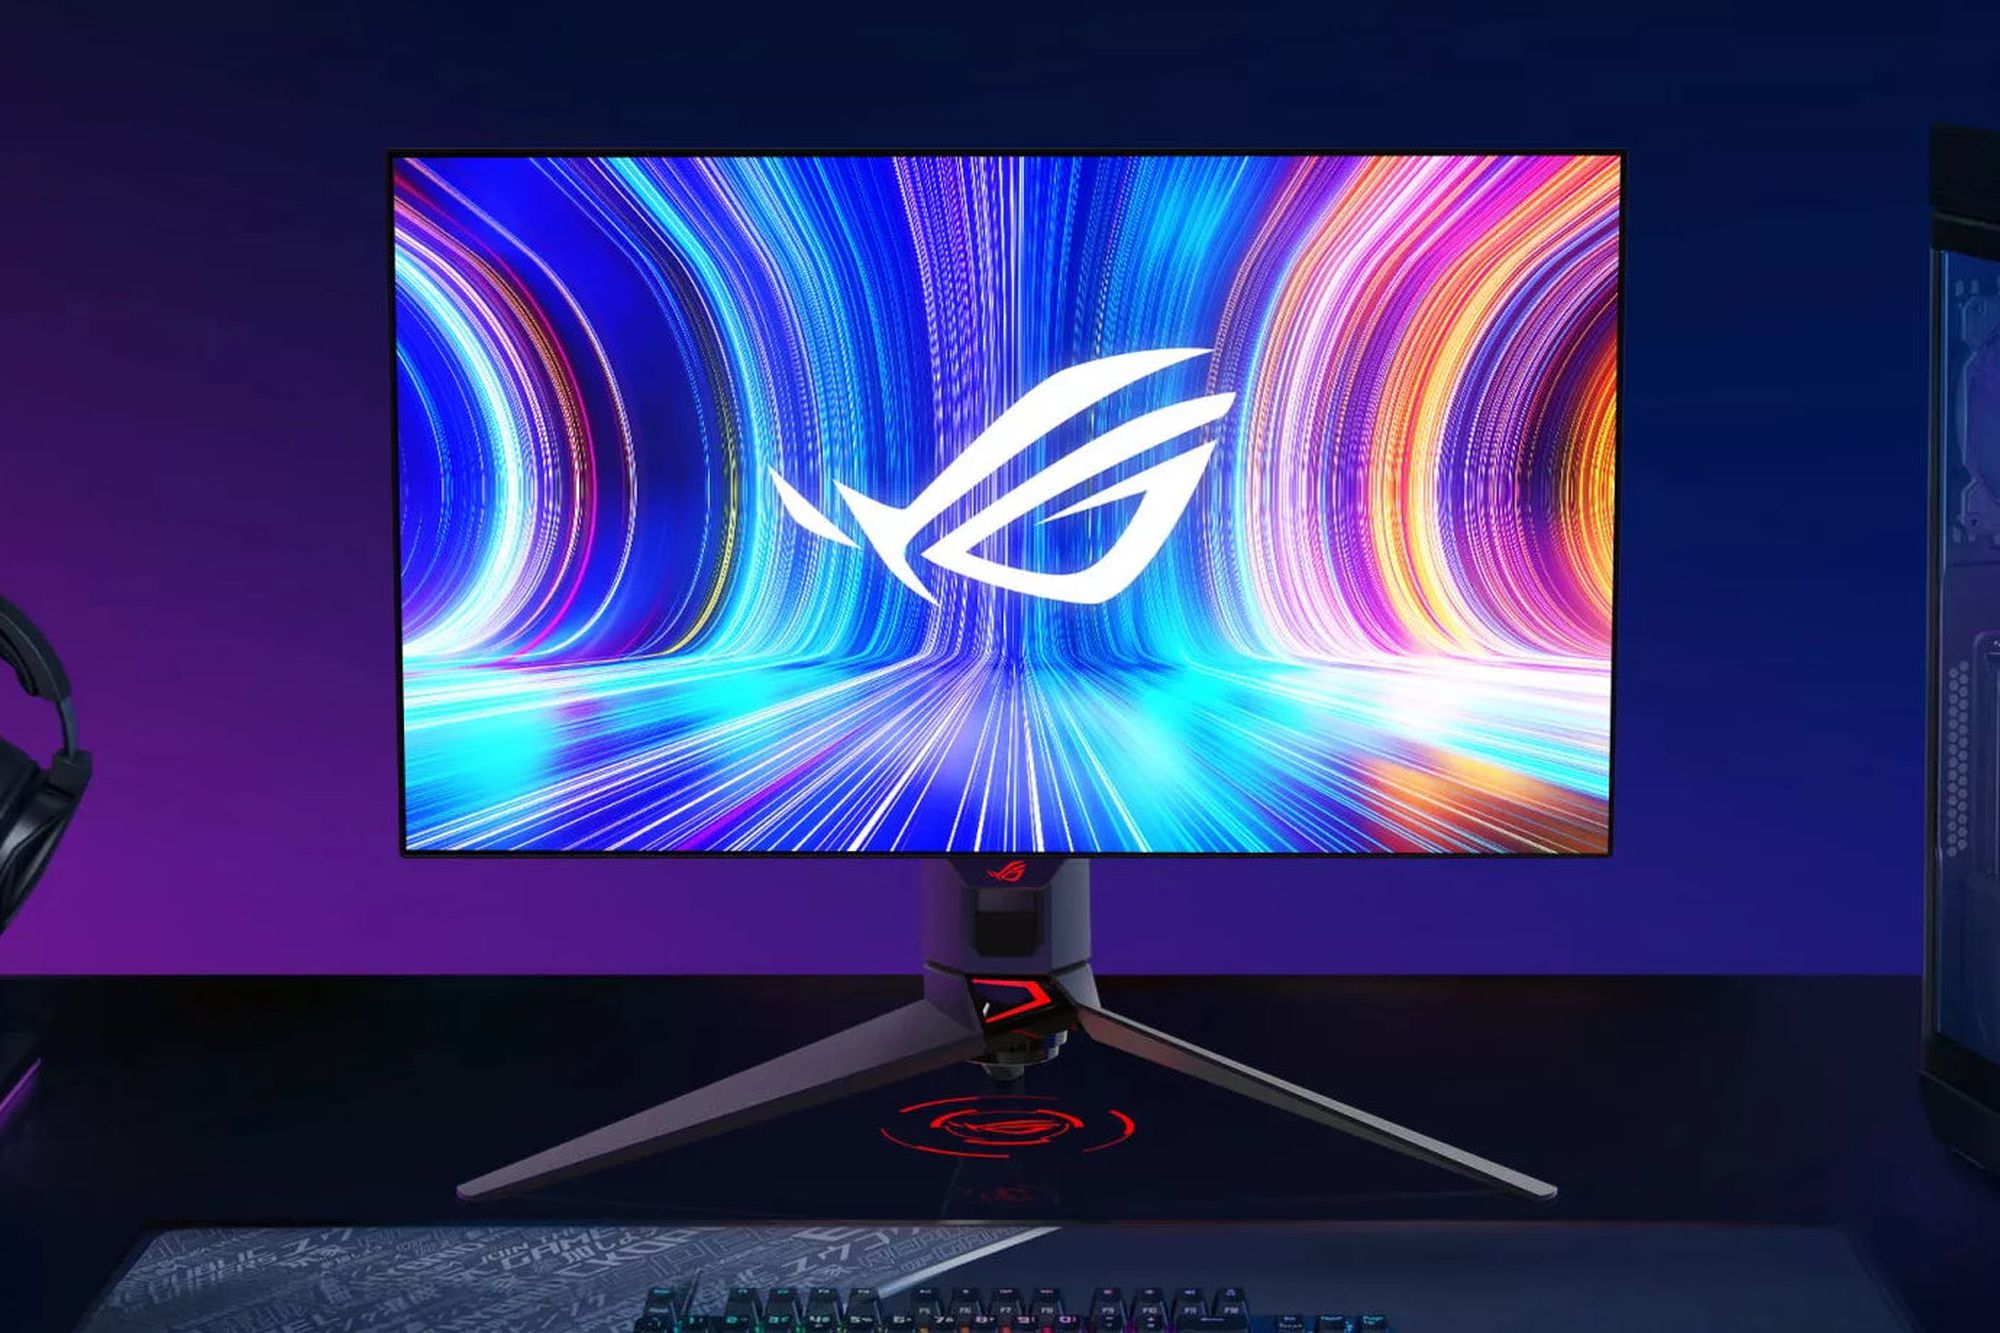 asus-gaming-monitor-75hz-how-to-access-the-quick-start-guide